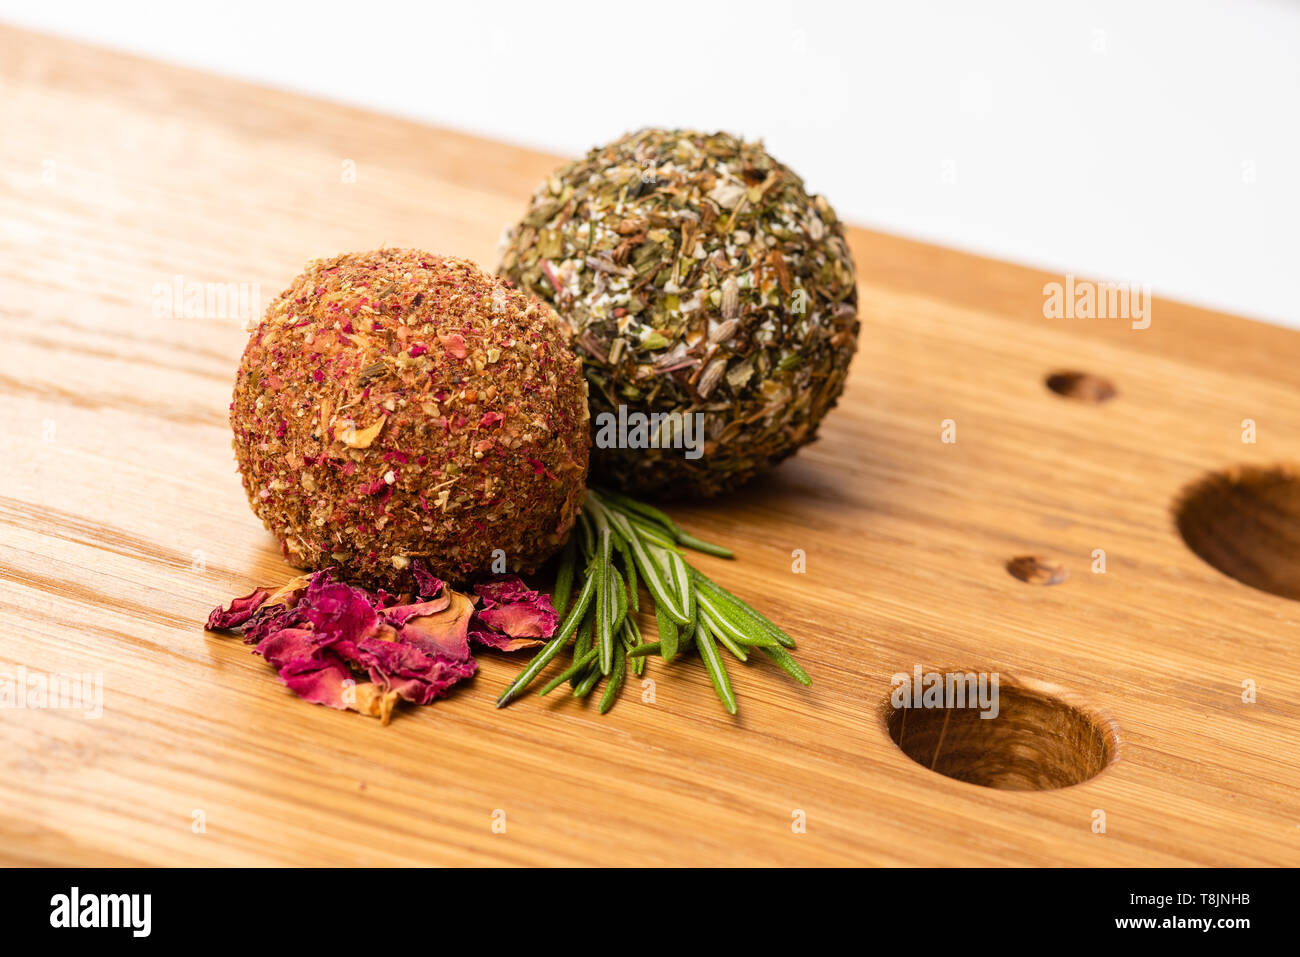 Close-up of two soft cheese balls labne with spices on wooden board. Stock Photo